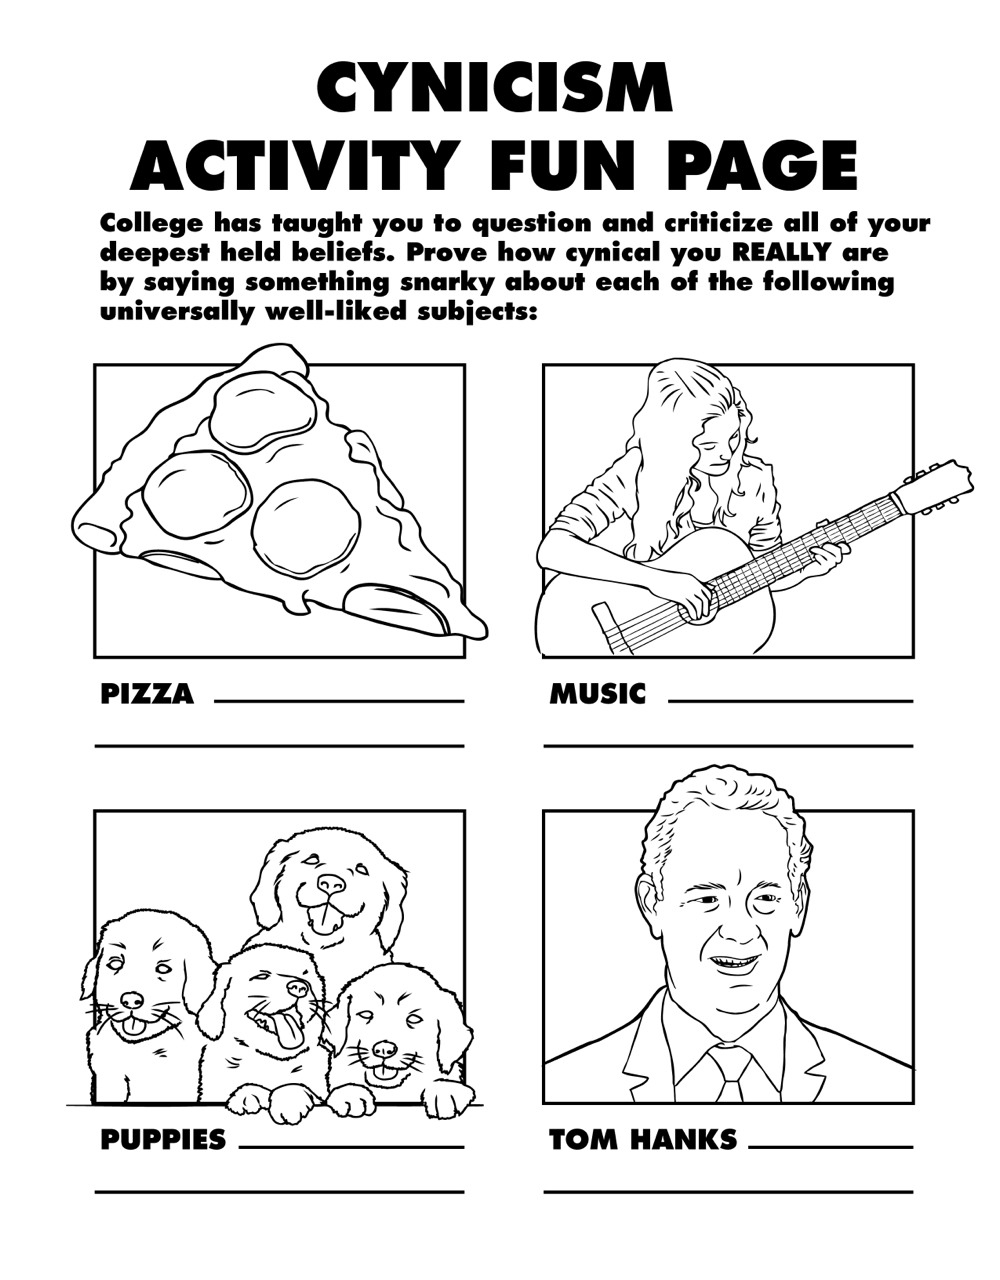 coloring for grown ups - Cynicism Activity Fun Page College has taught you to question and criticize all of your deepest held beliefs. Prove how cynical you Really are by saying something snarky about each of the ing universally welld subjects Pizza Music